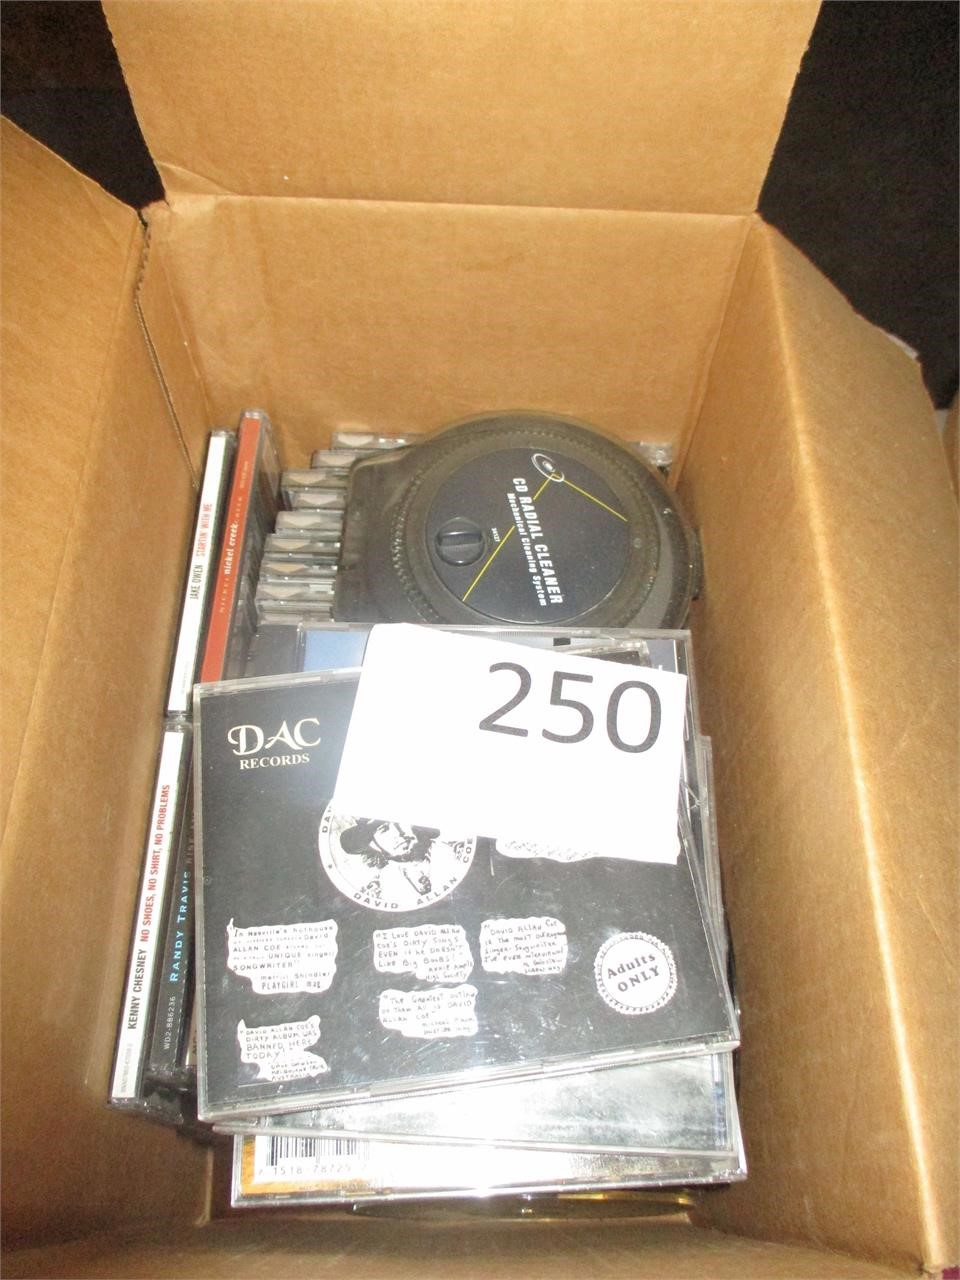 Box of CDs--Country Music